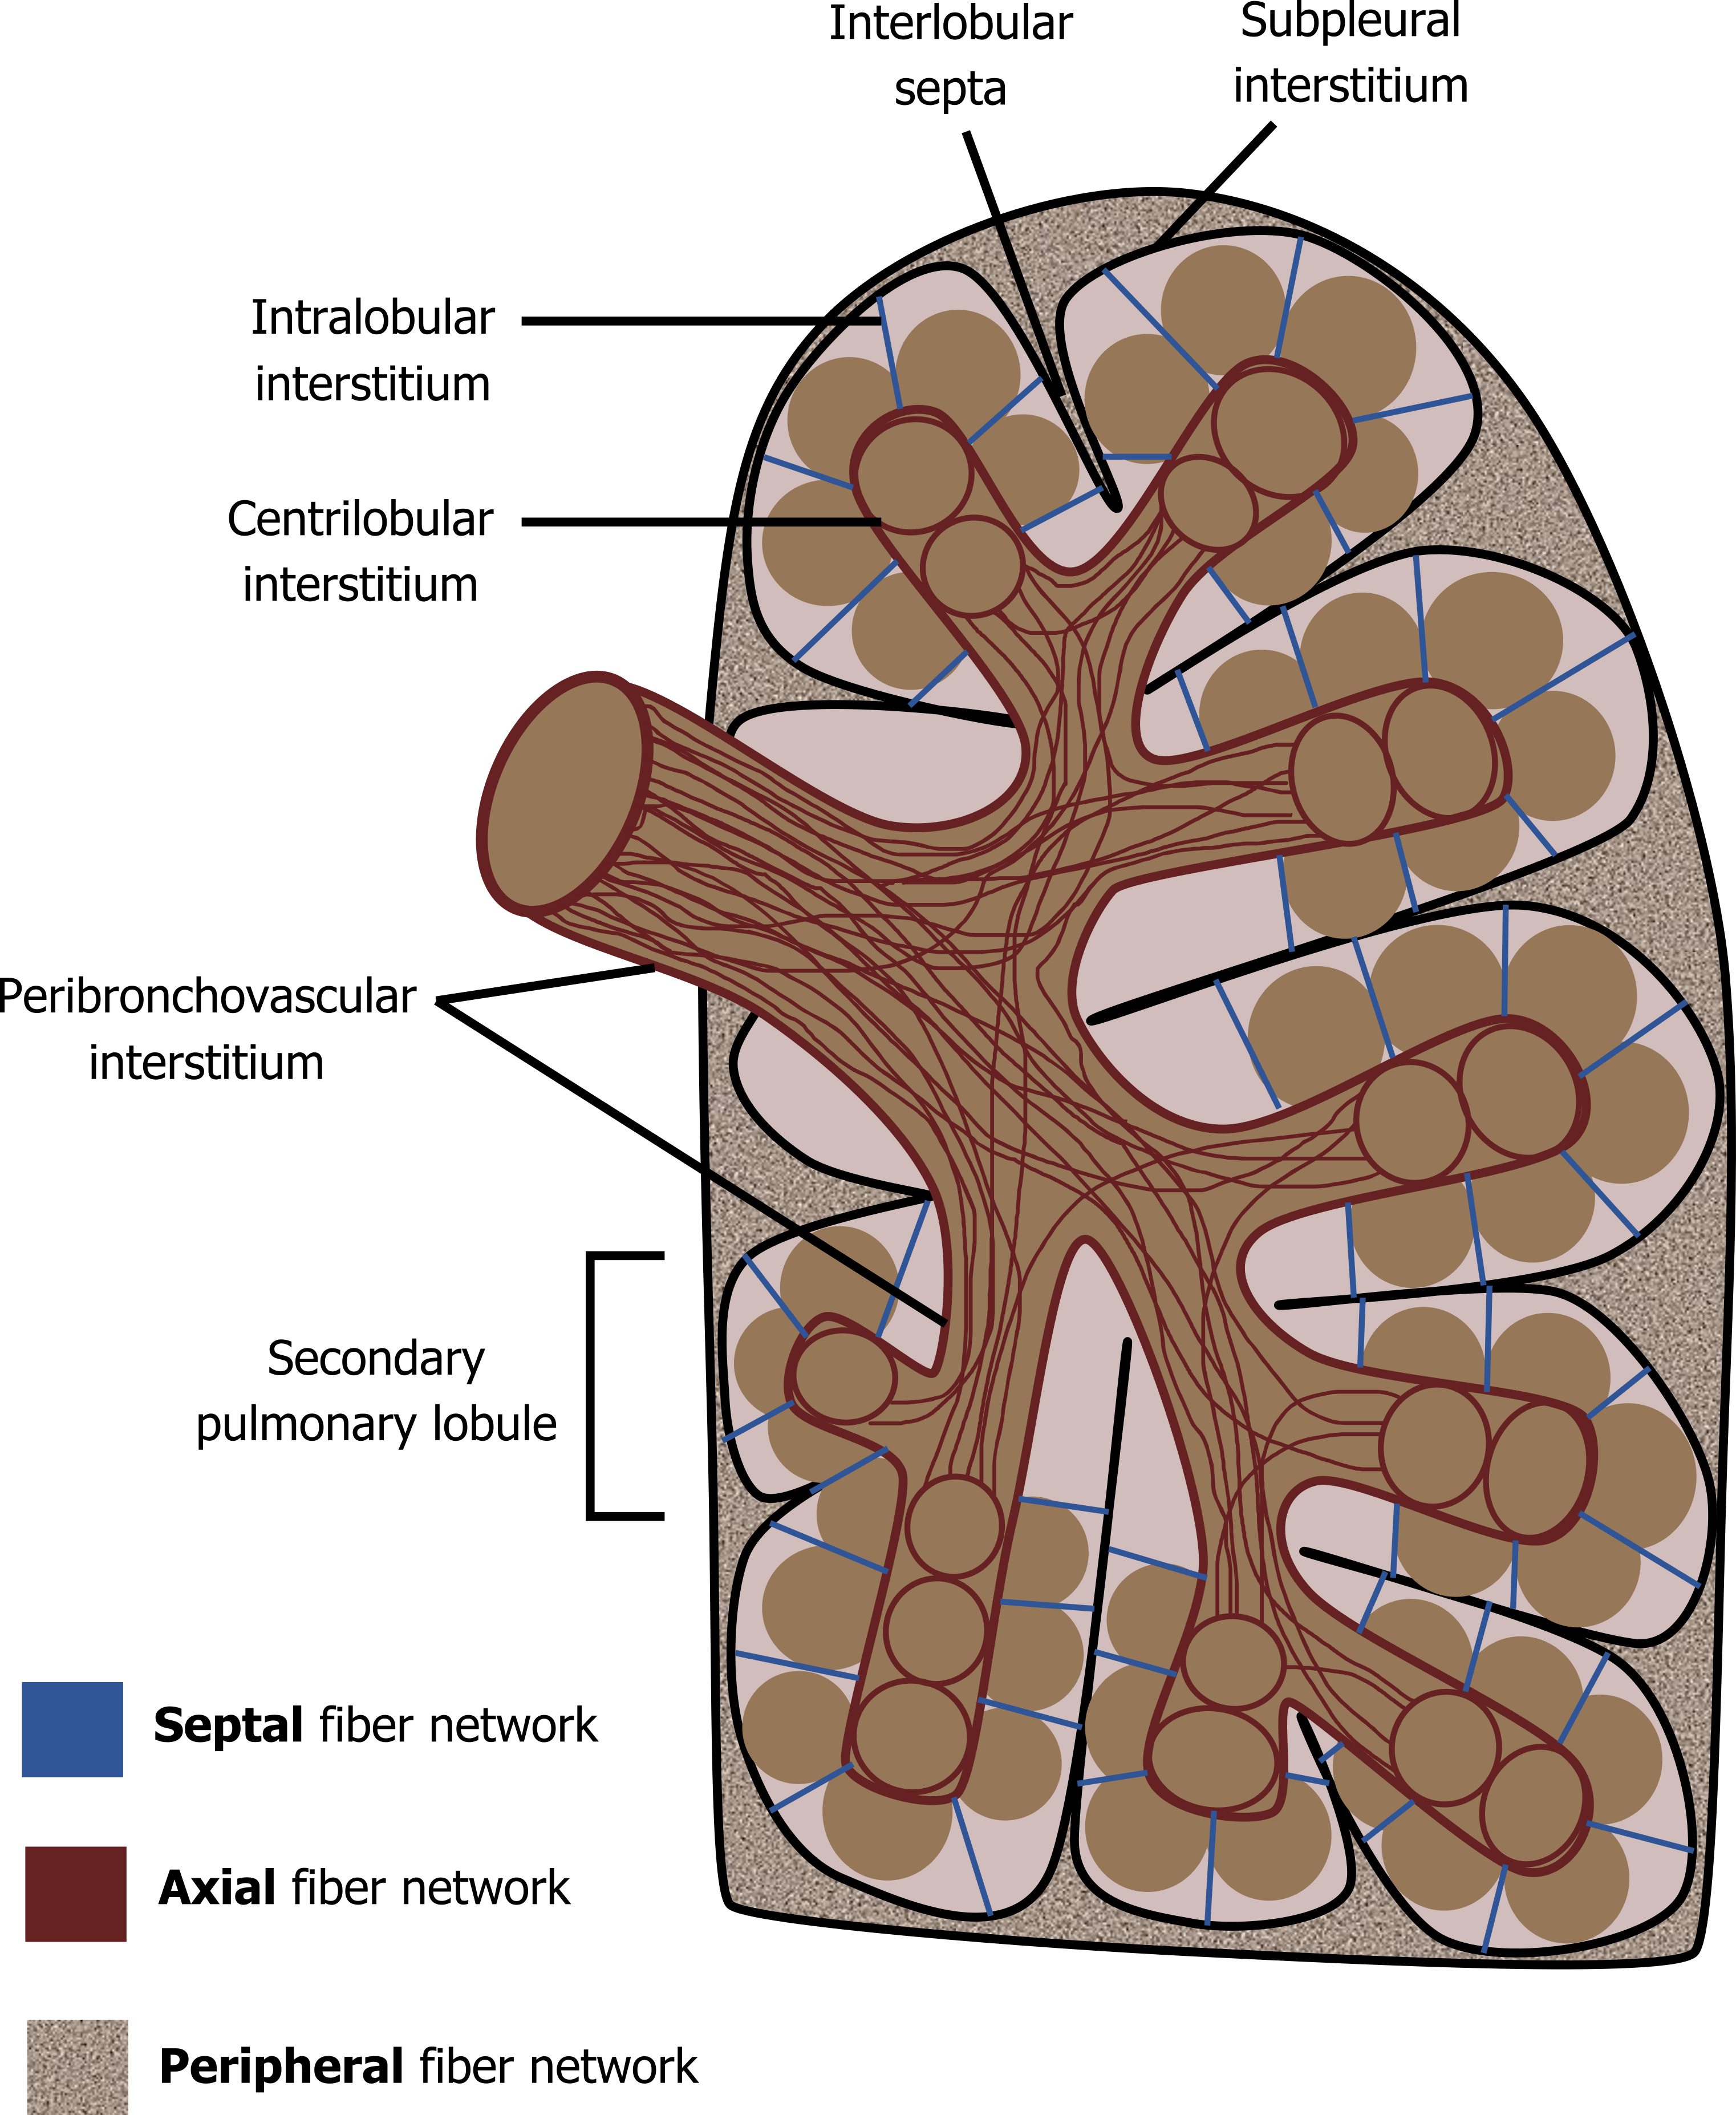 The figure shows a cartoon of a lung with a bronchi entering the lung and dividing into bronchi that lead to distinct lobes within the lung. These airways have red line along their length that are labelled as the axial fiber network. The distinct lobes are pink and have blue lines across their area that are labelled septal fiber networks. The regions of the lung surrounding the lobes are sand colored and labelled as peripheral fiber networks.